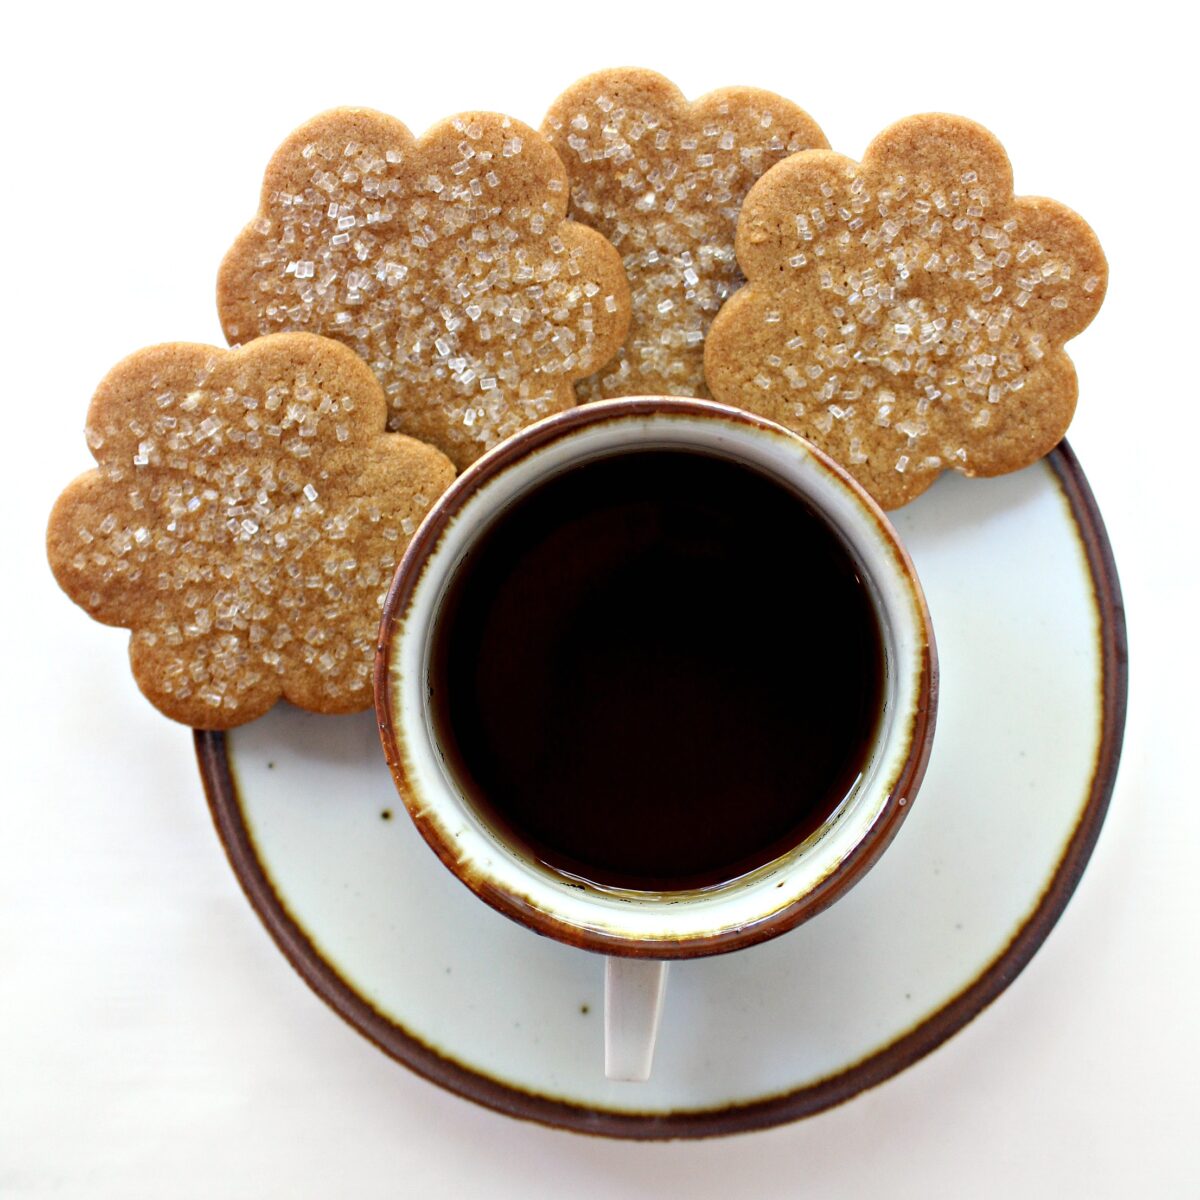 Overhead image of flower shaped cookie snaps on the saucer of a cup of tea.